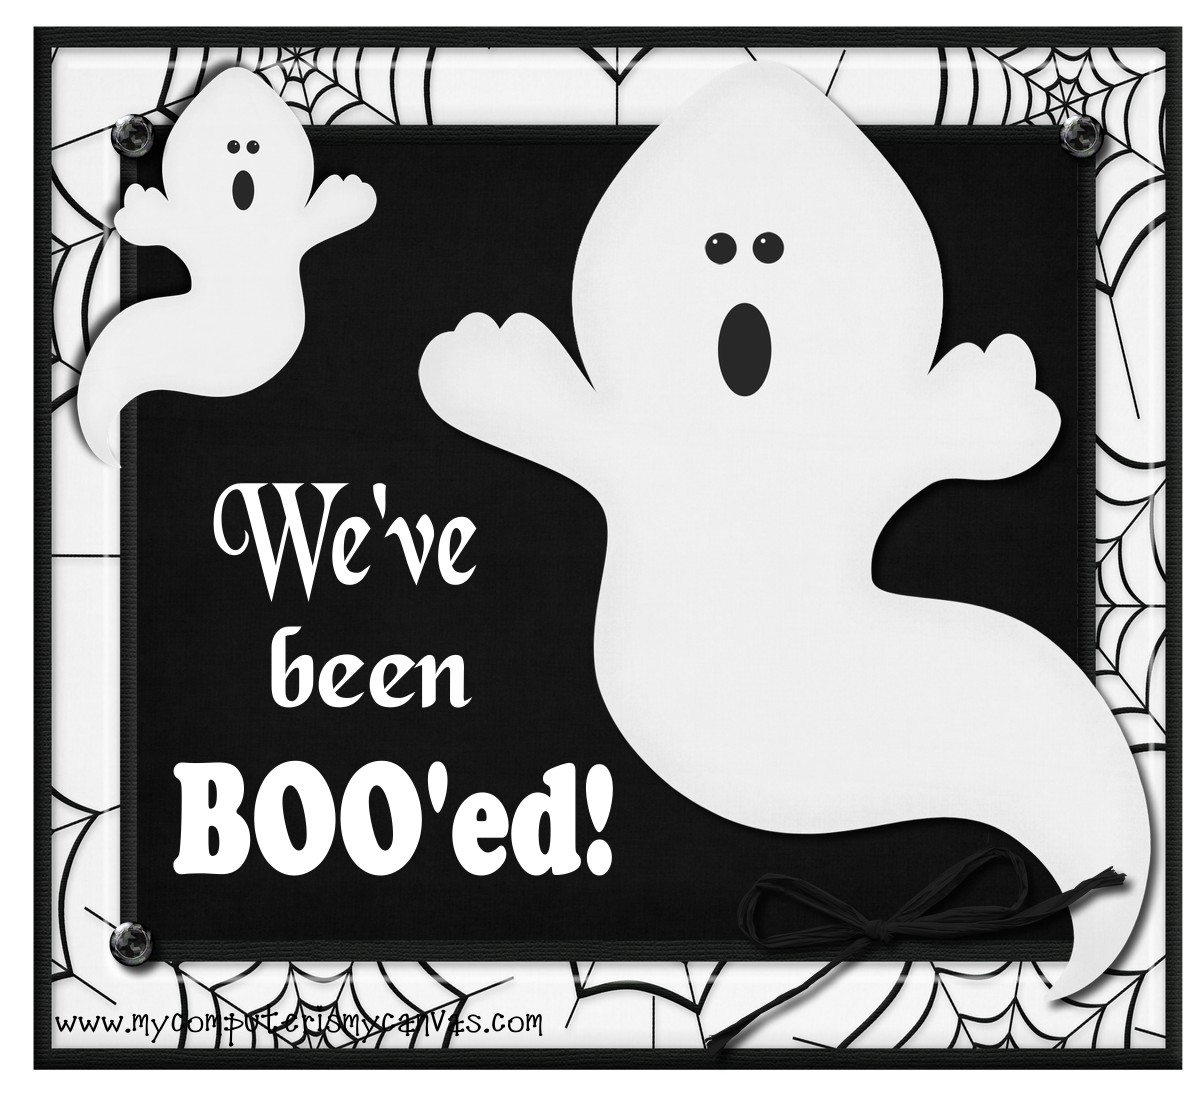 freebie-boo-ed-sign-4-recipes-my-computer-is-my-canvas